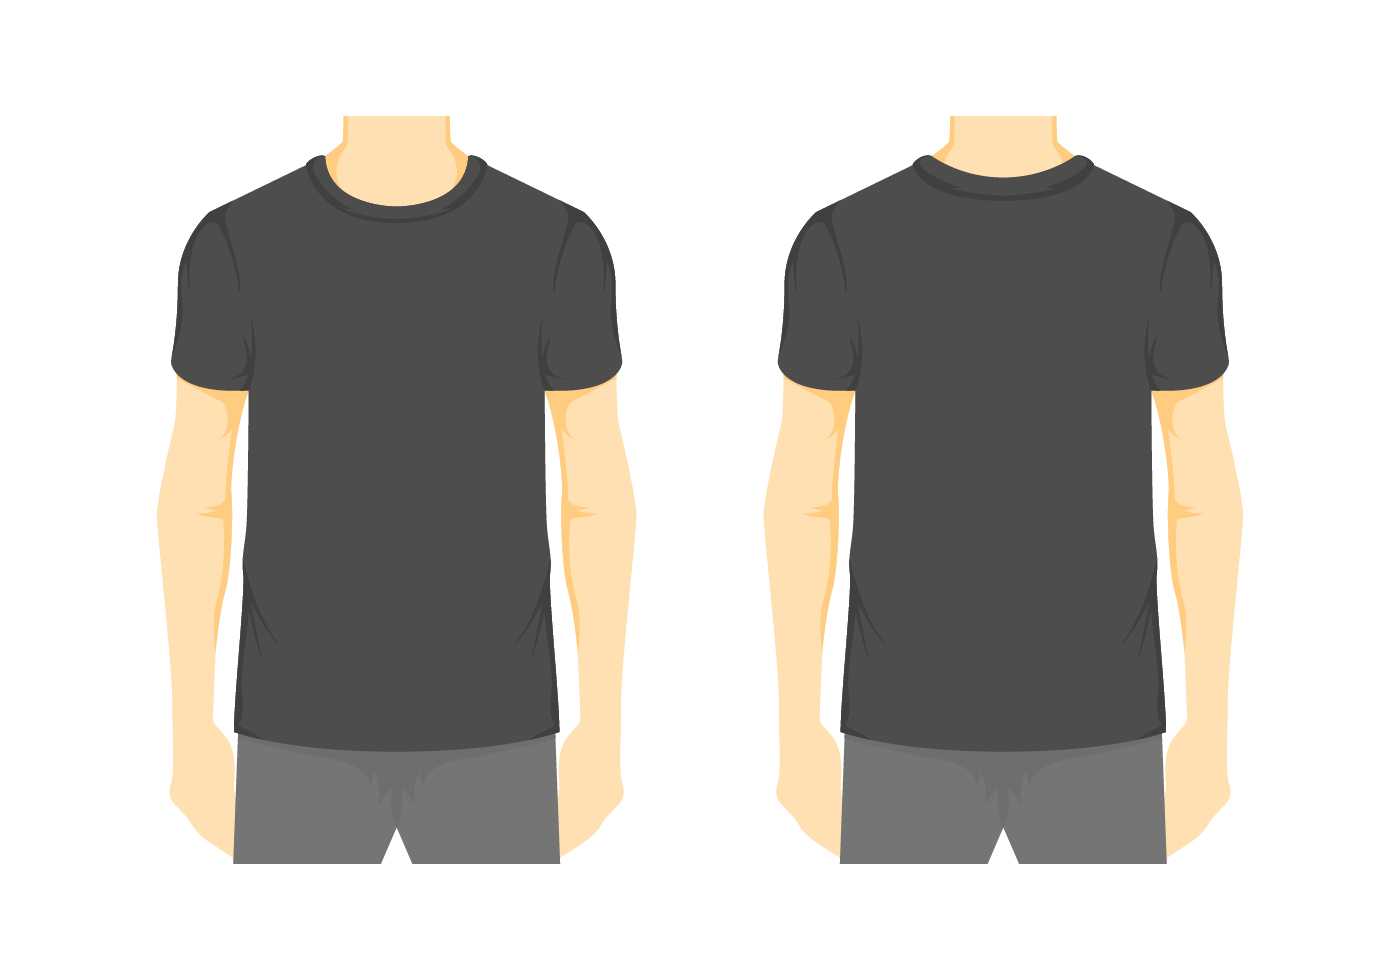 Vector Blank T Shirt Template 2 – Download Free Vectors Pertaining To Blank Tee Shirt Template